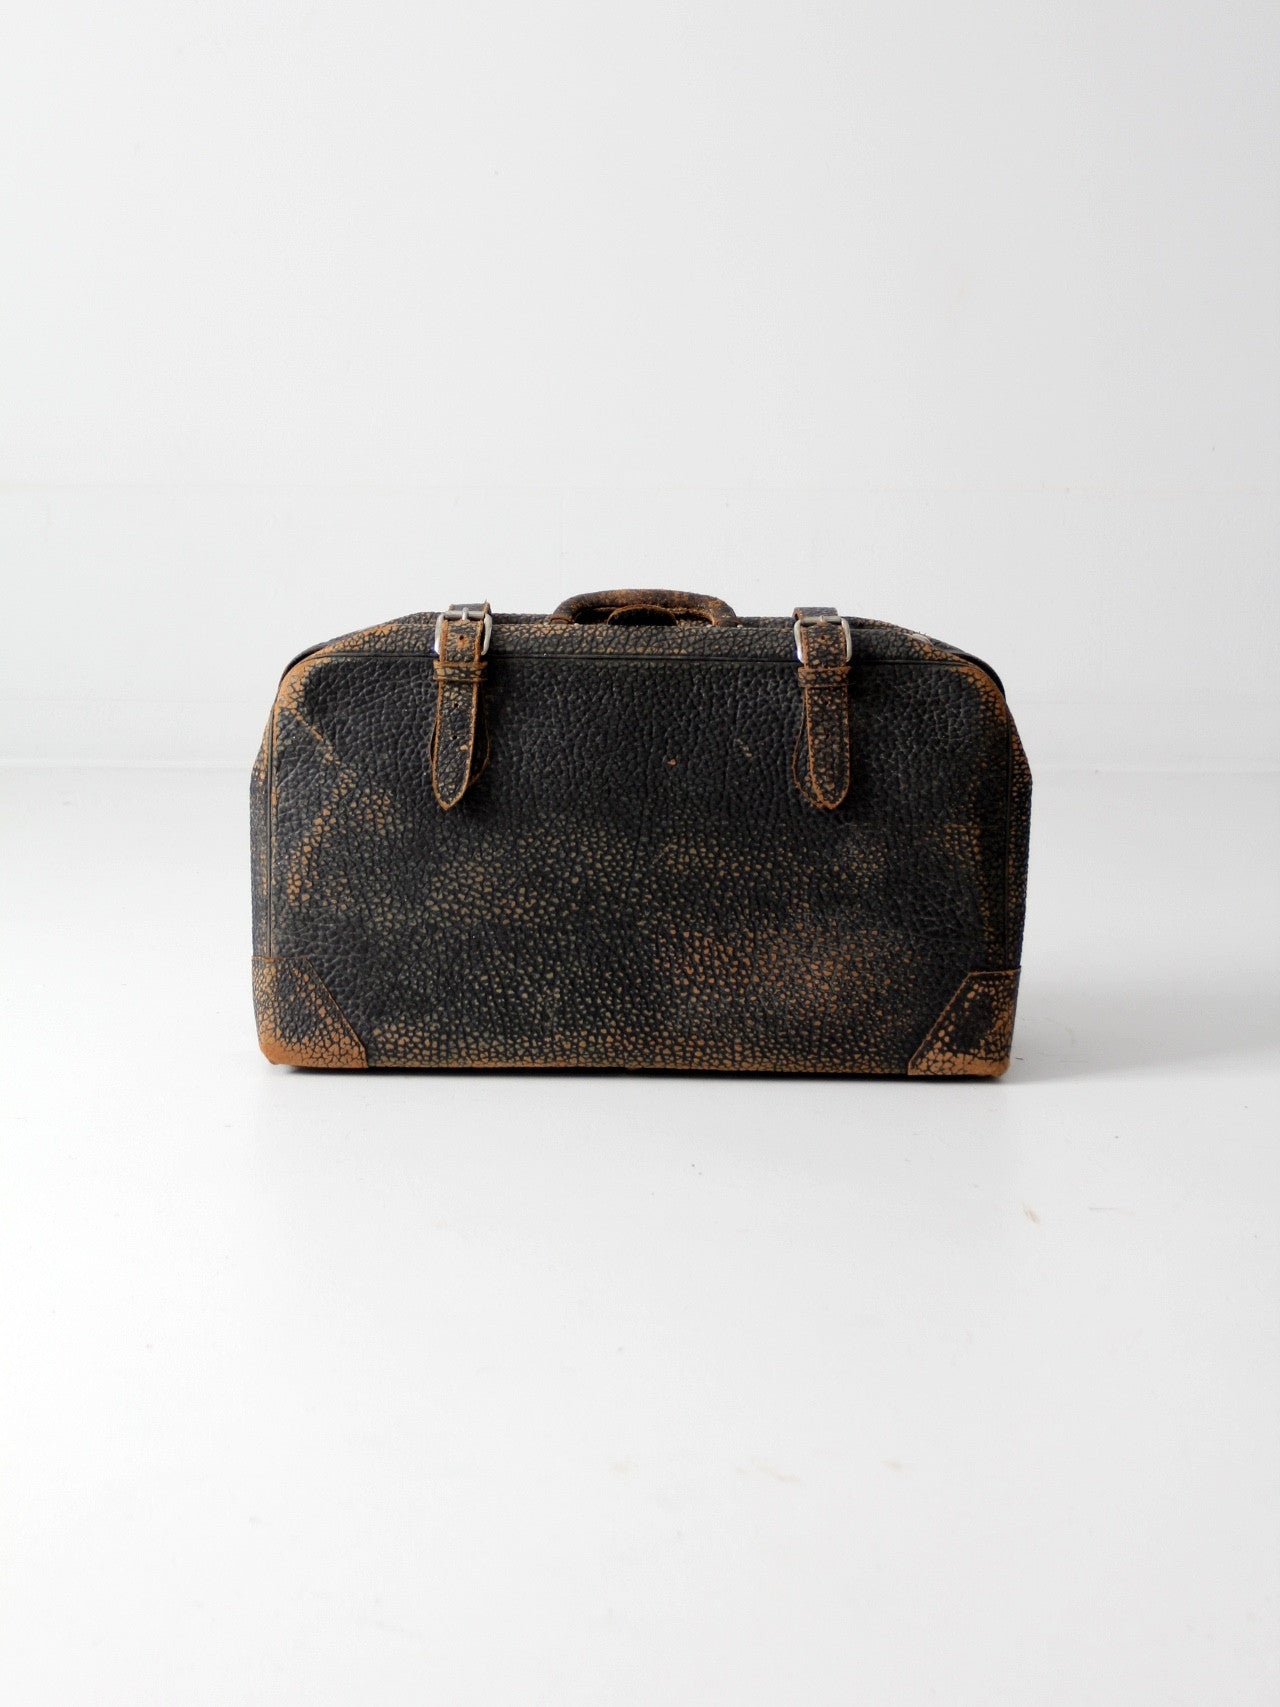 Small Leather Suitcase